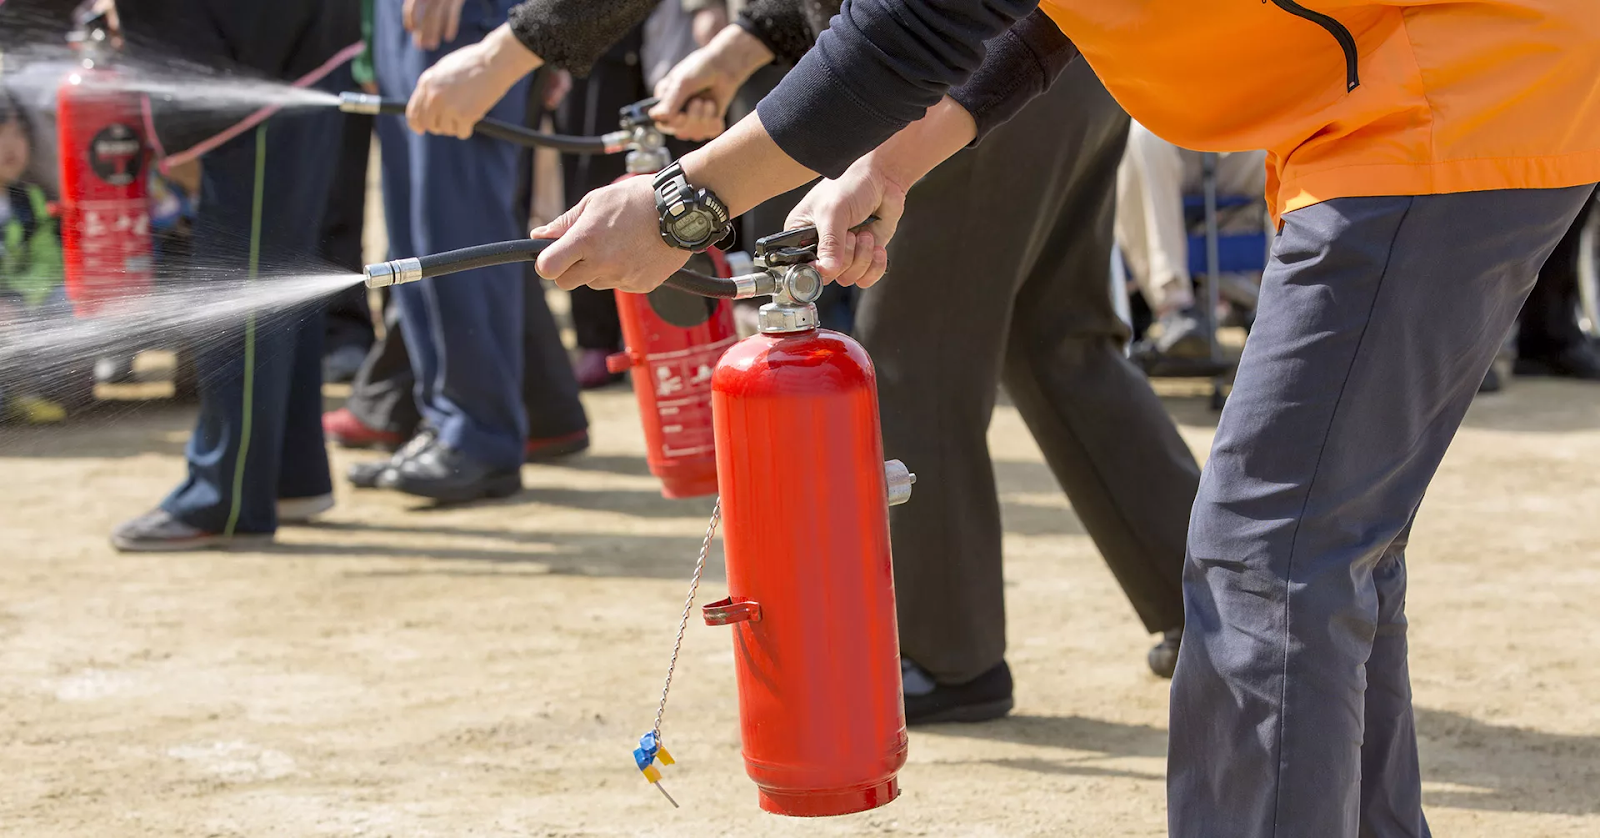 Training for technicians performing fire alarm tests
